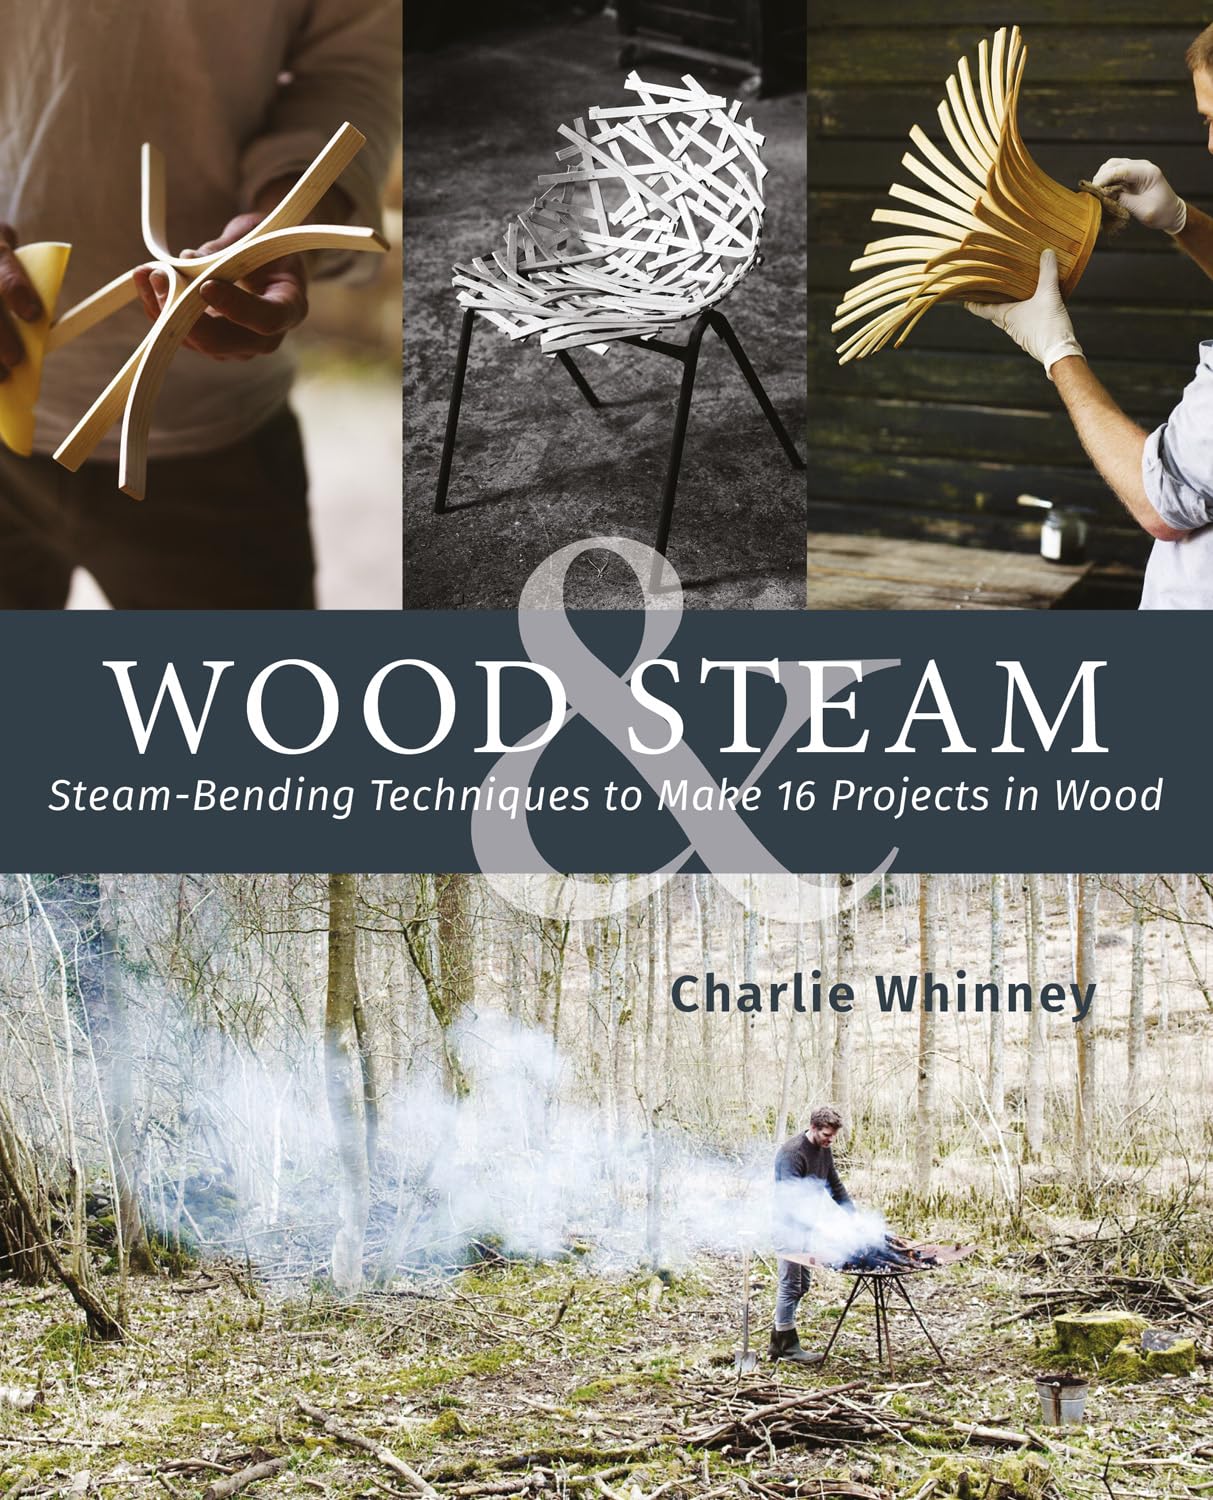 Wood & Steam: Steam-Bending Techniques to Make 16 Projects in Wood (Fox Chapel Publishing) Steam-Bent Masterpieces and Step-by-Step Instructions to